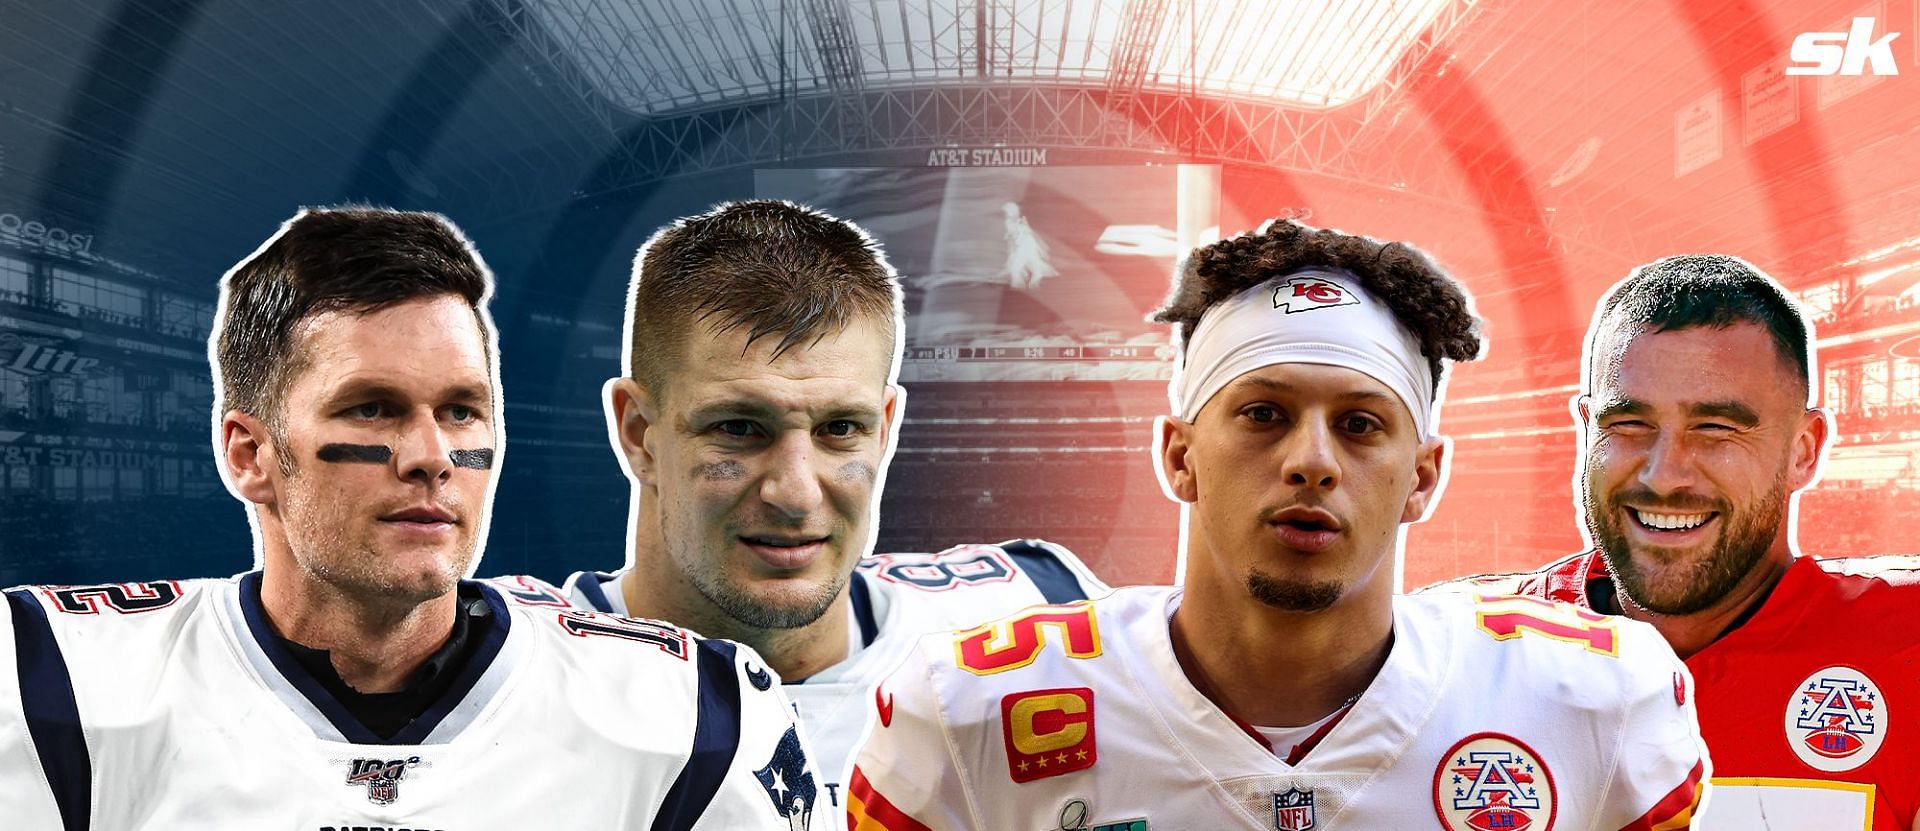 Tom Brady in awe of Patrick Mahomes &amp; Travis Kelce as Chiefs duo make playoff history